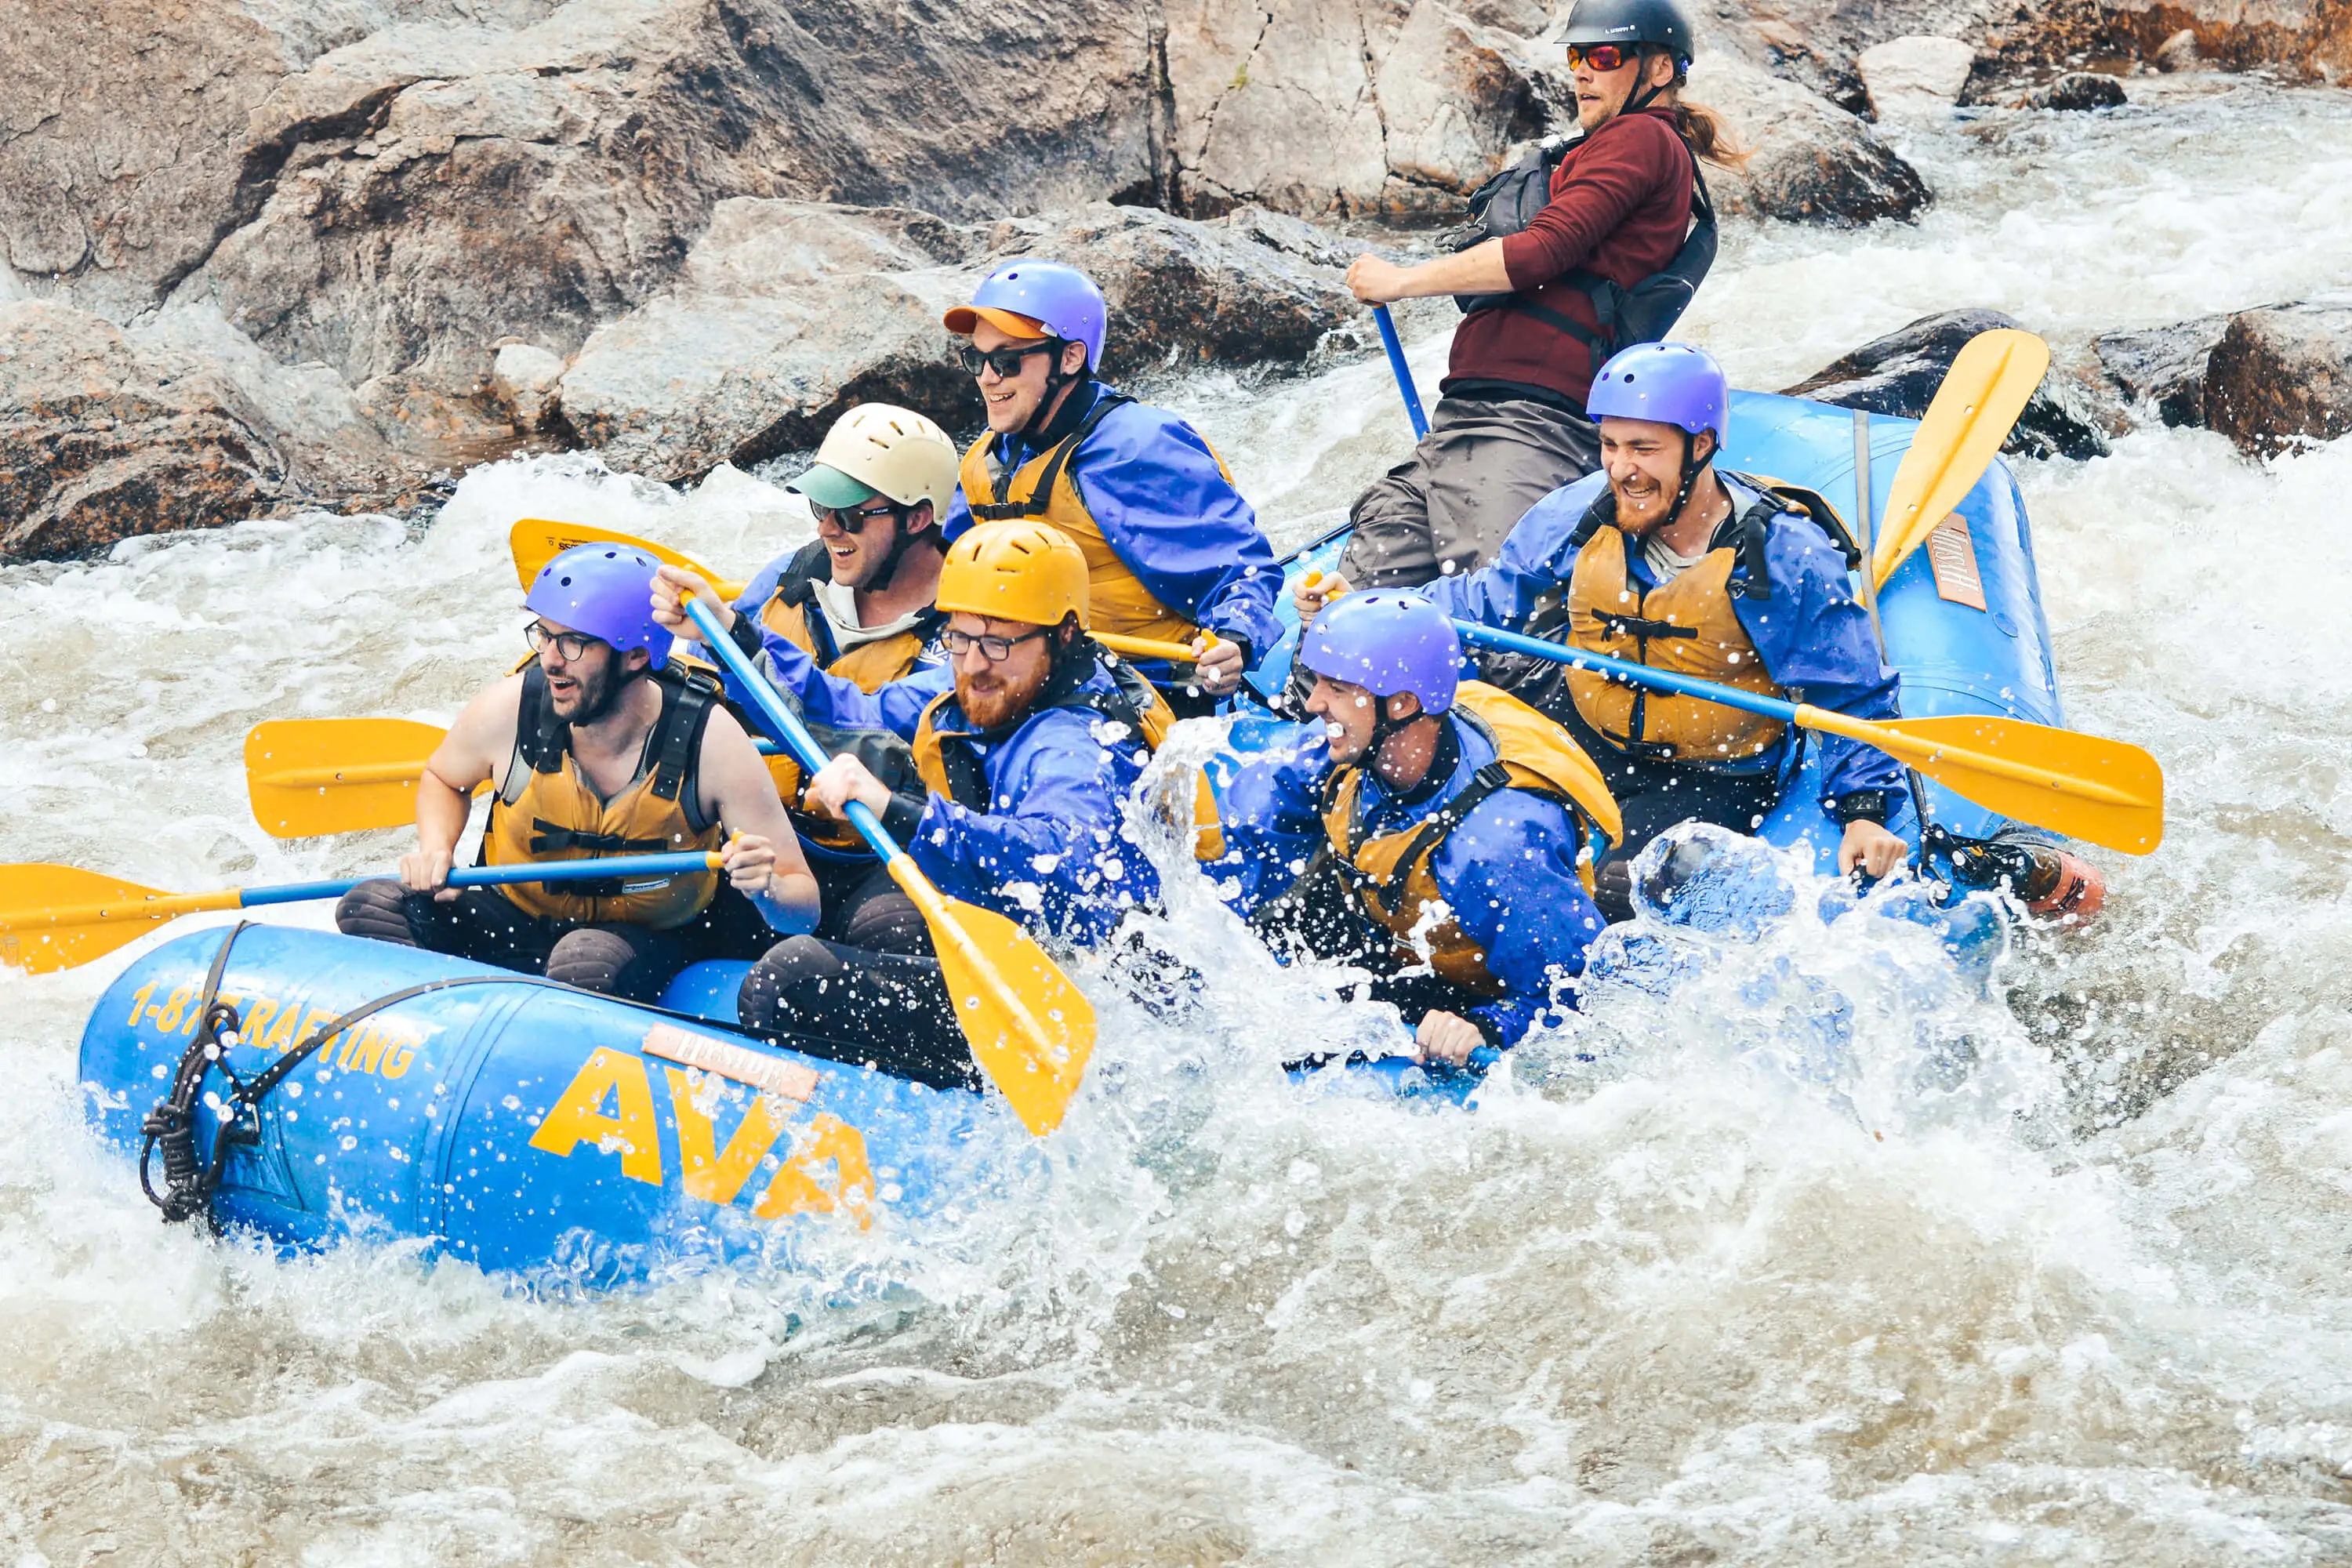 A group of men rafting through a whitewater rapid with smiles on their faces